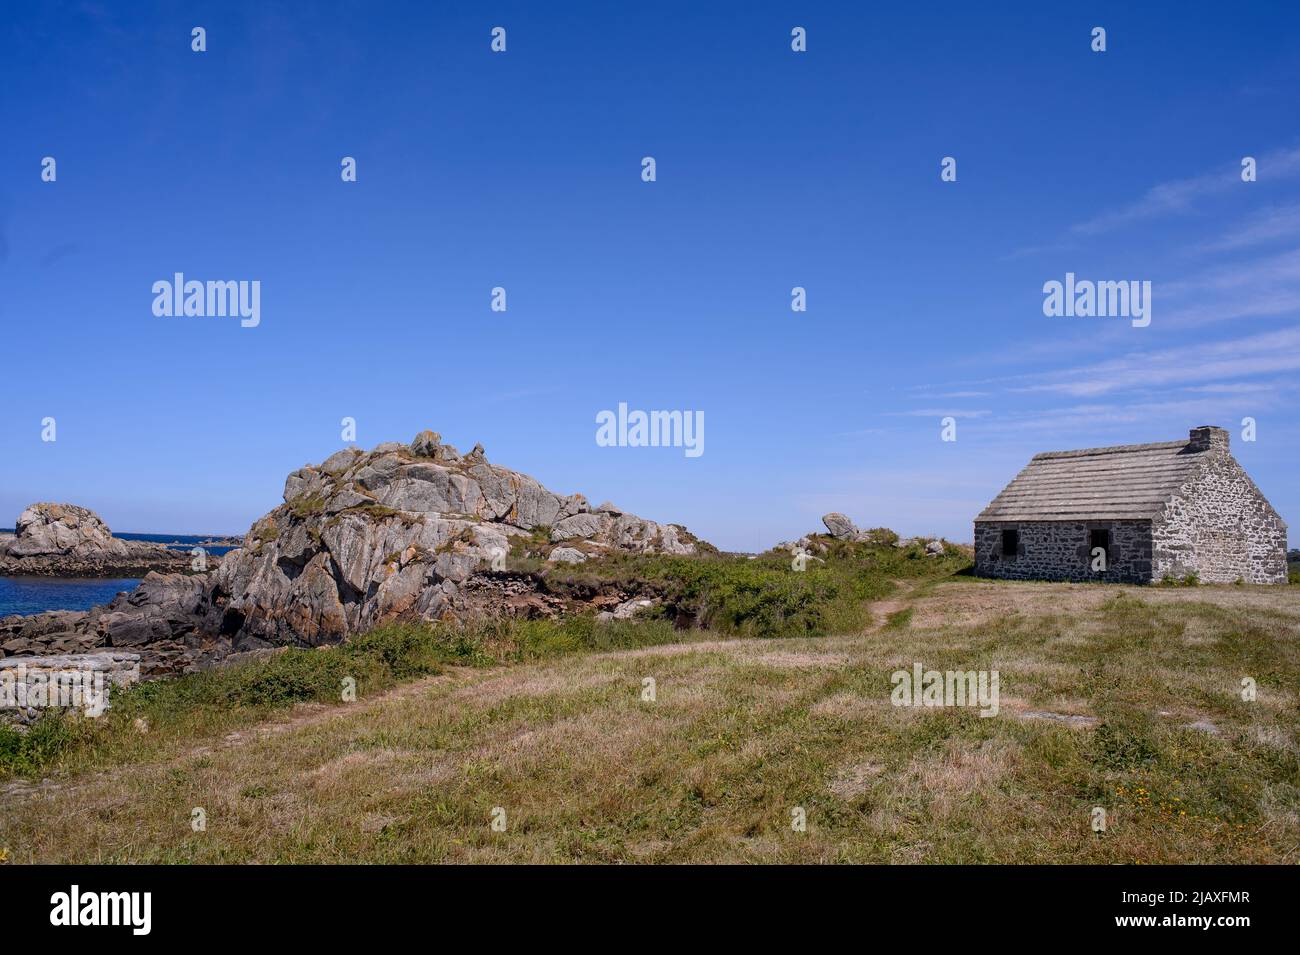 Typical Breton stone house. This old fisherman's house on a promontory facing the sea seems to have been there as long as the rock that protects it. Stock Photo